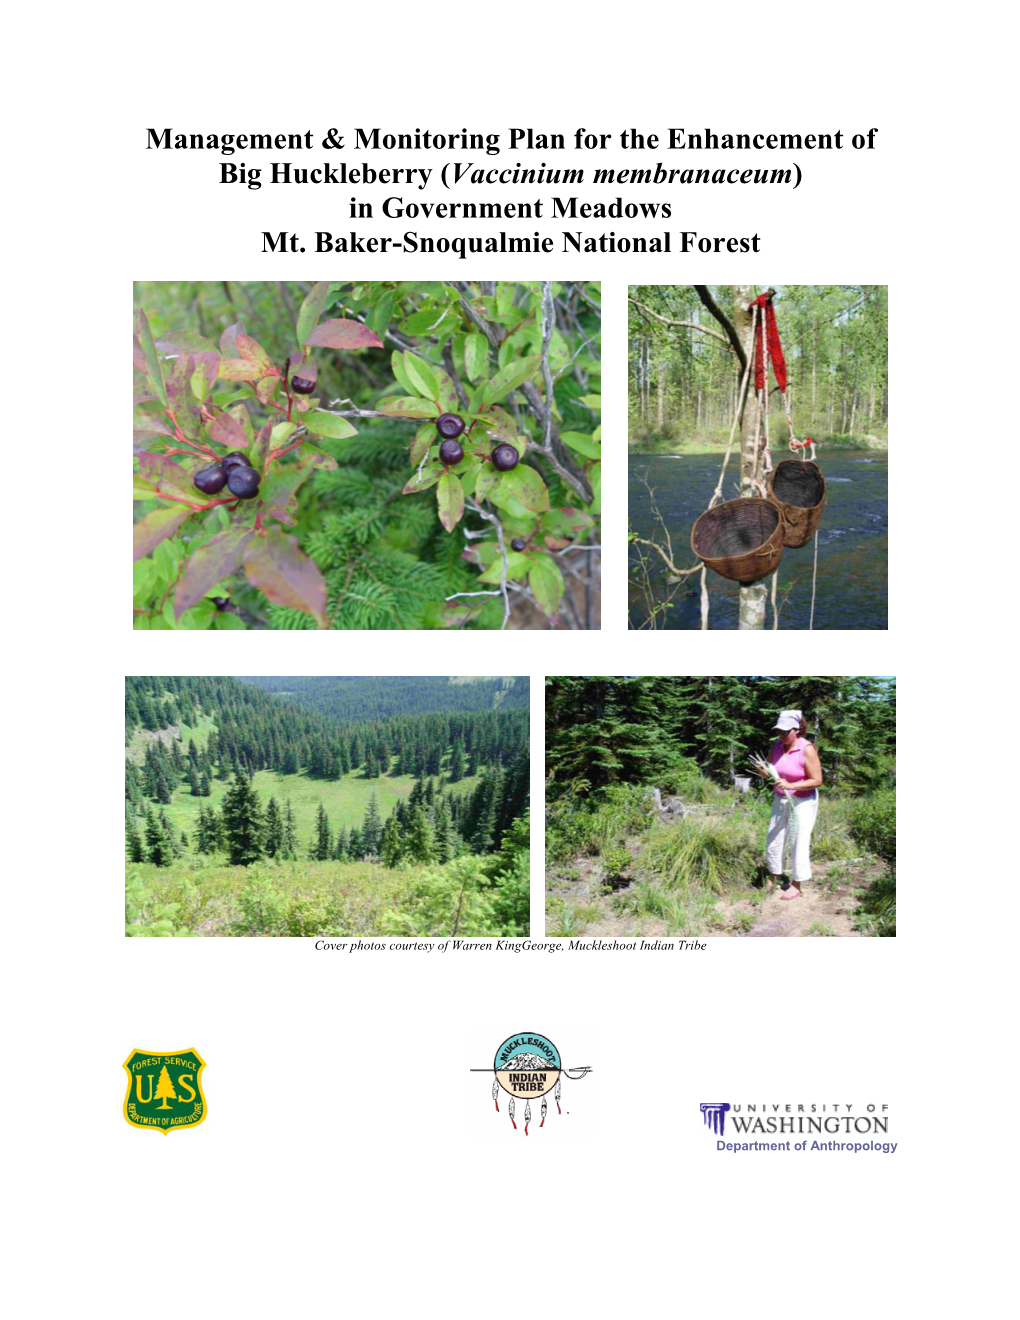 Management & Monitoring Plan for the Enhancement of Big Huckleberry (Vaccinium Membranaceum) in Government Meadows